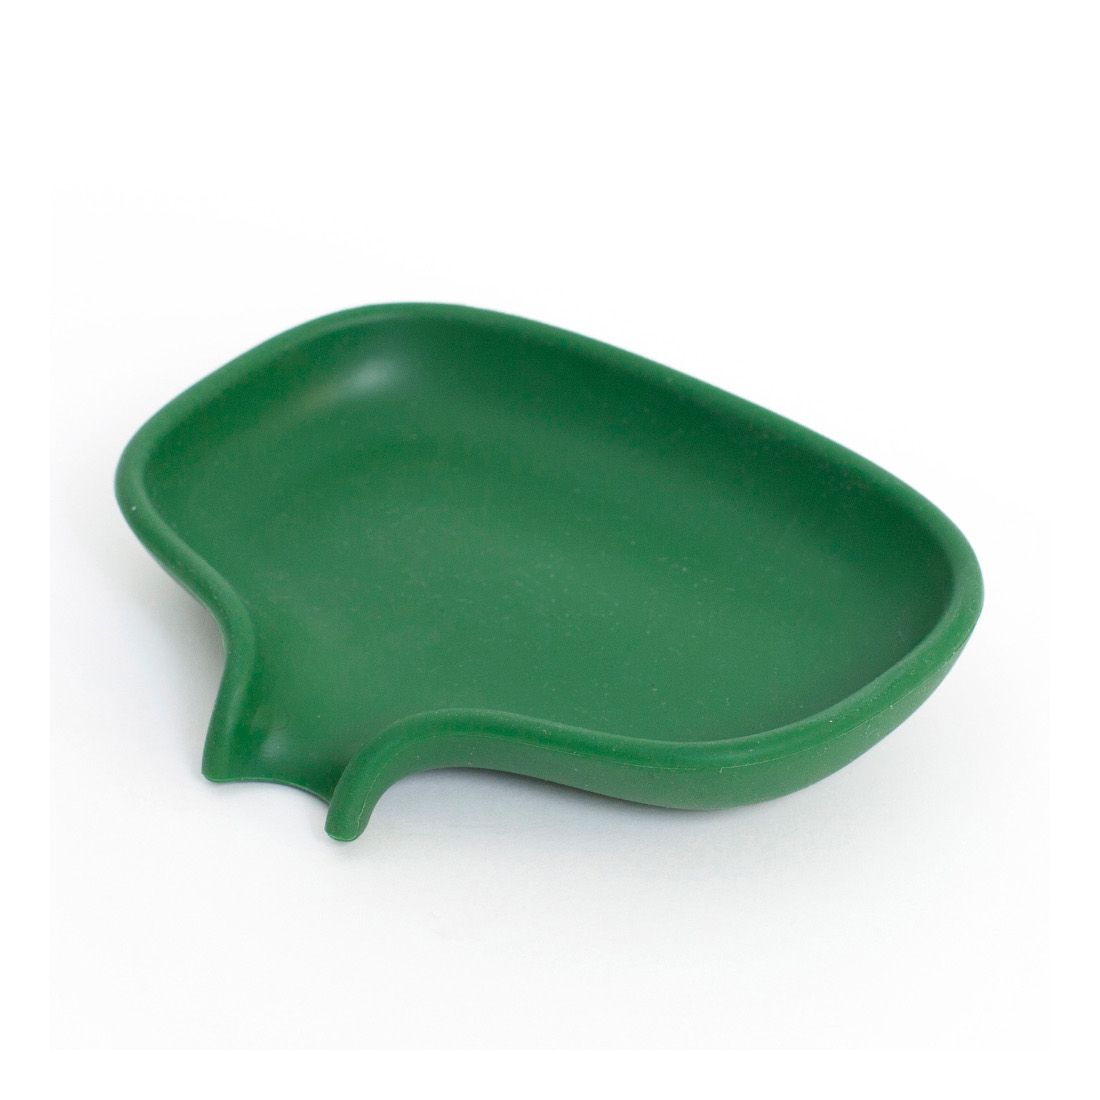 Bosign Bosign Flow Soapsaver Soap Dish Large With Draining Spout In Dark Green Recyclable Silicone